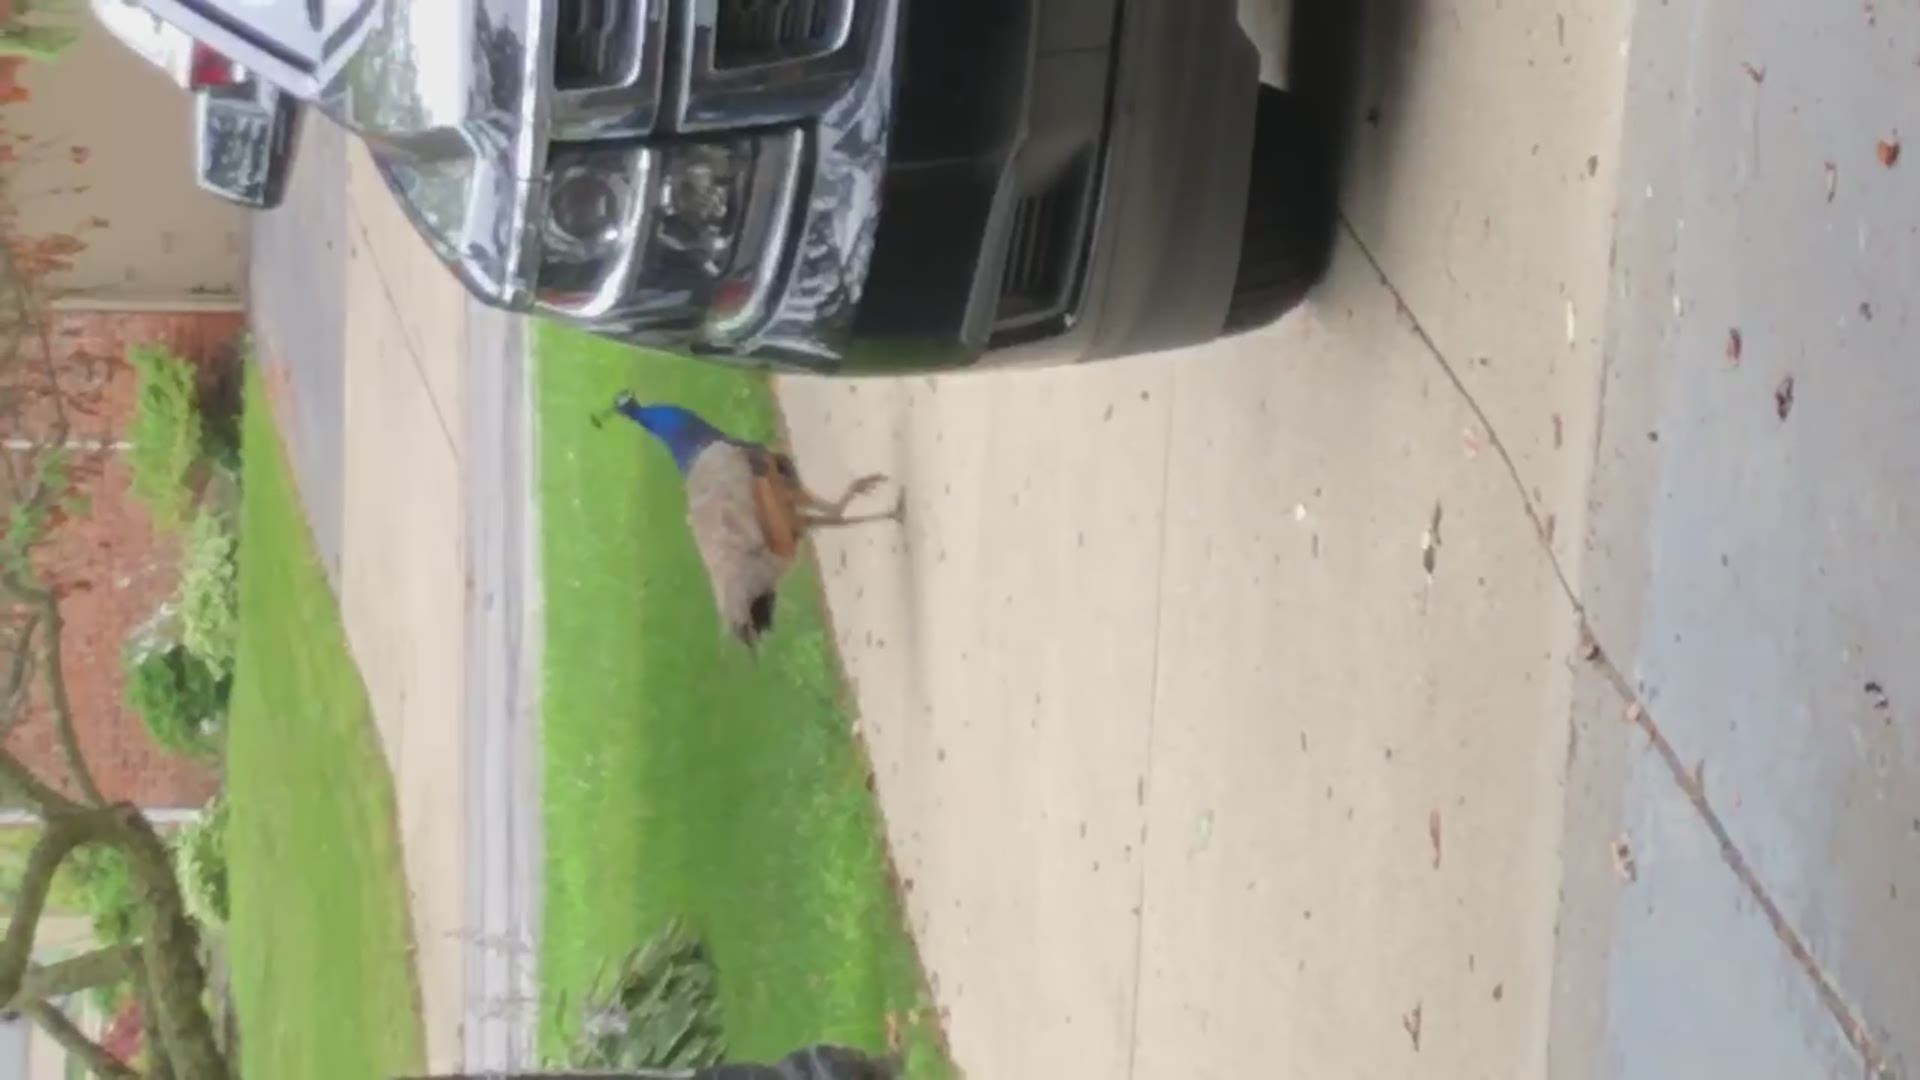 Police have been getting reports of a peacock being seen around town. If anyone is missing the bird, they ask that person to contact them.